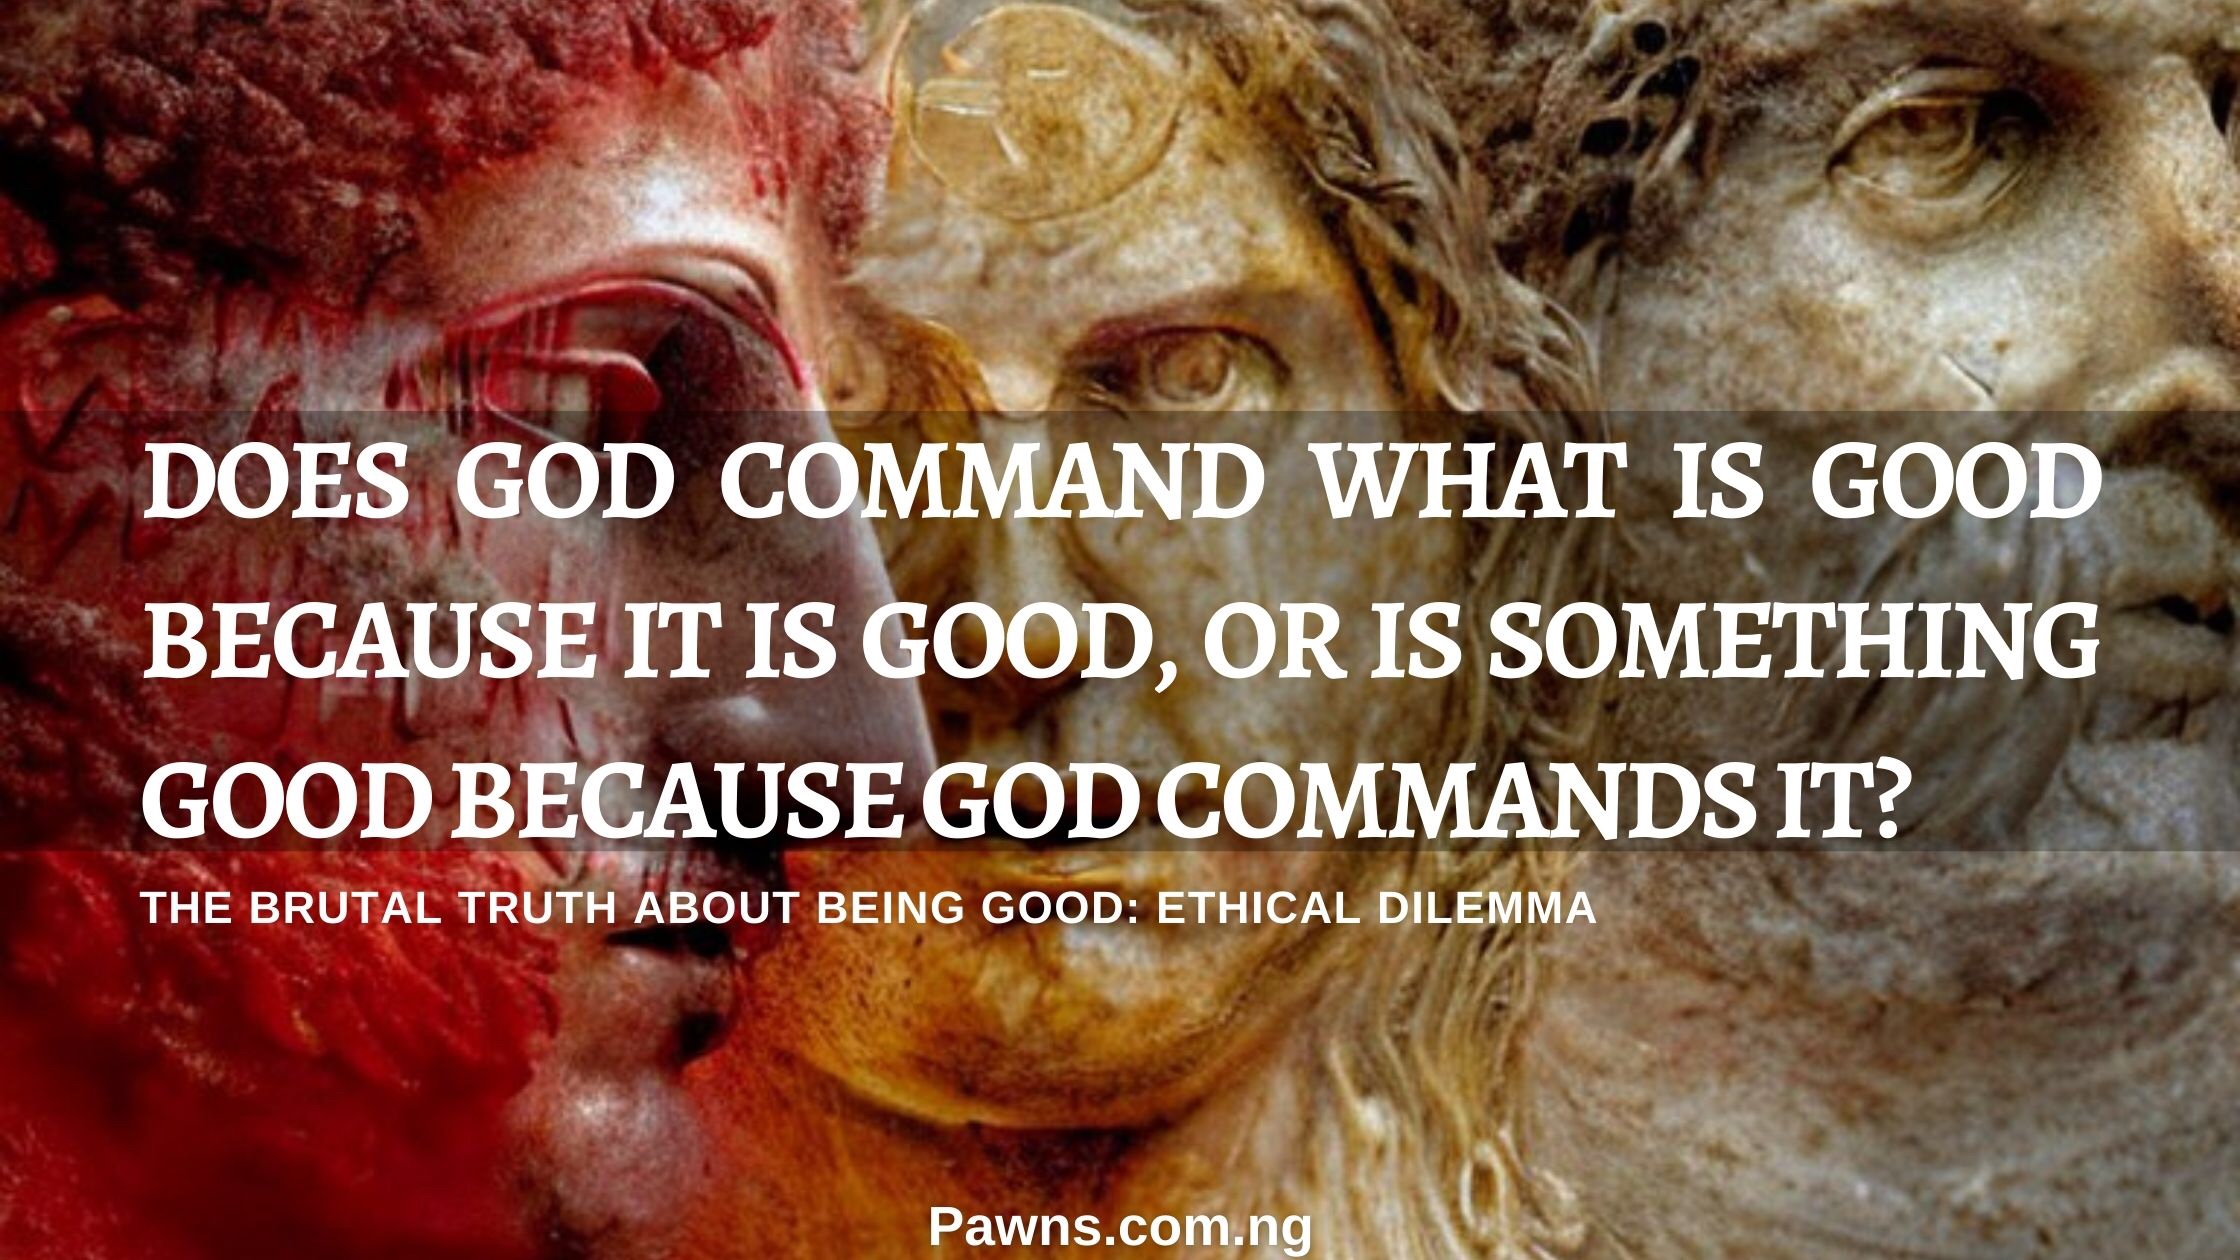 does God command what is good because it is good, or is something good because god commands it? The brutal truth about being good: ethical dilemma.